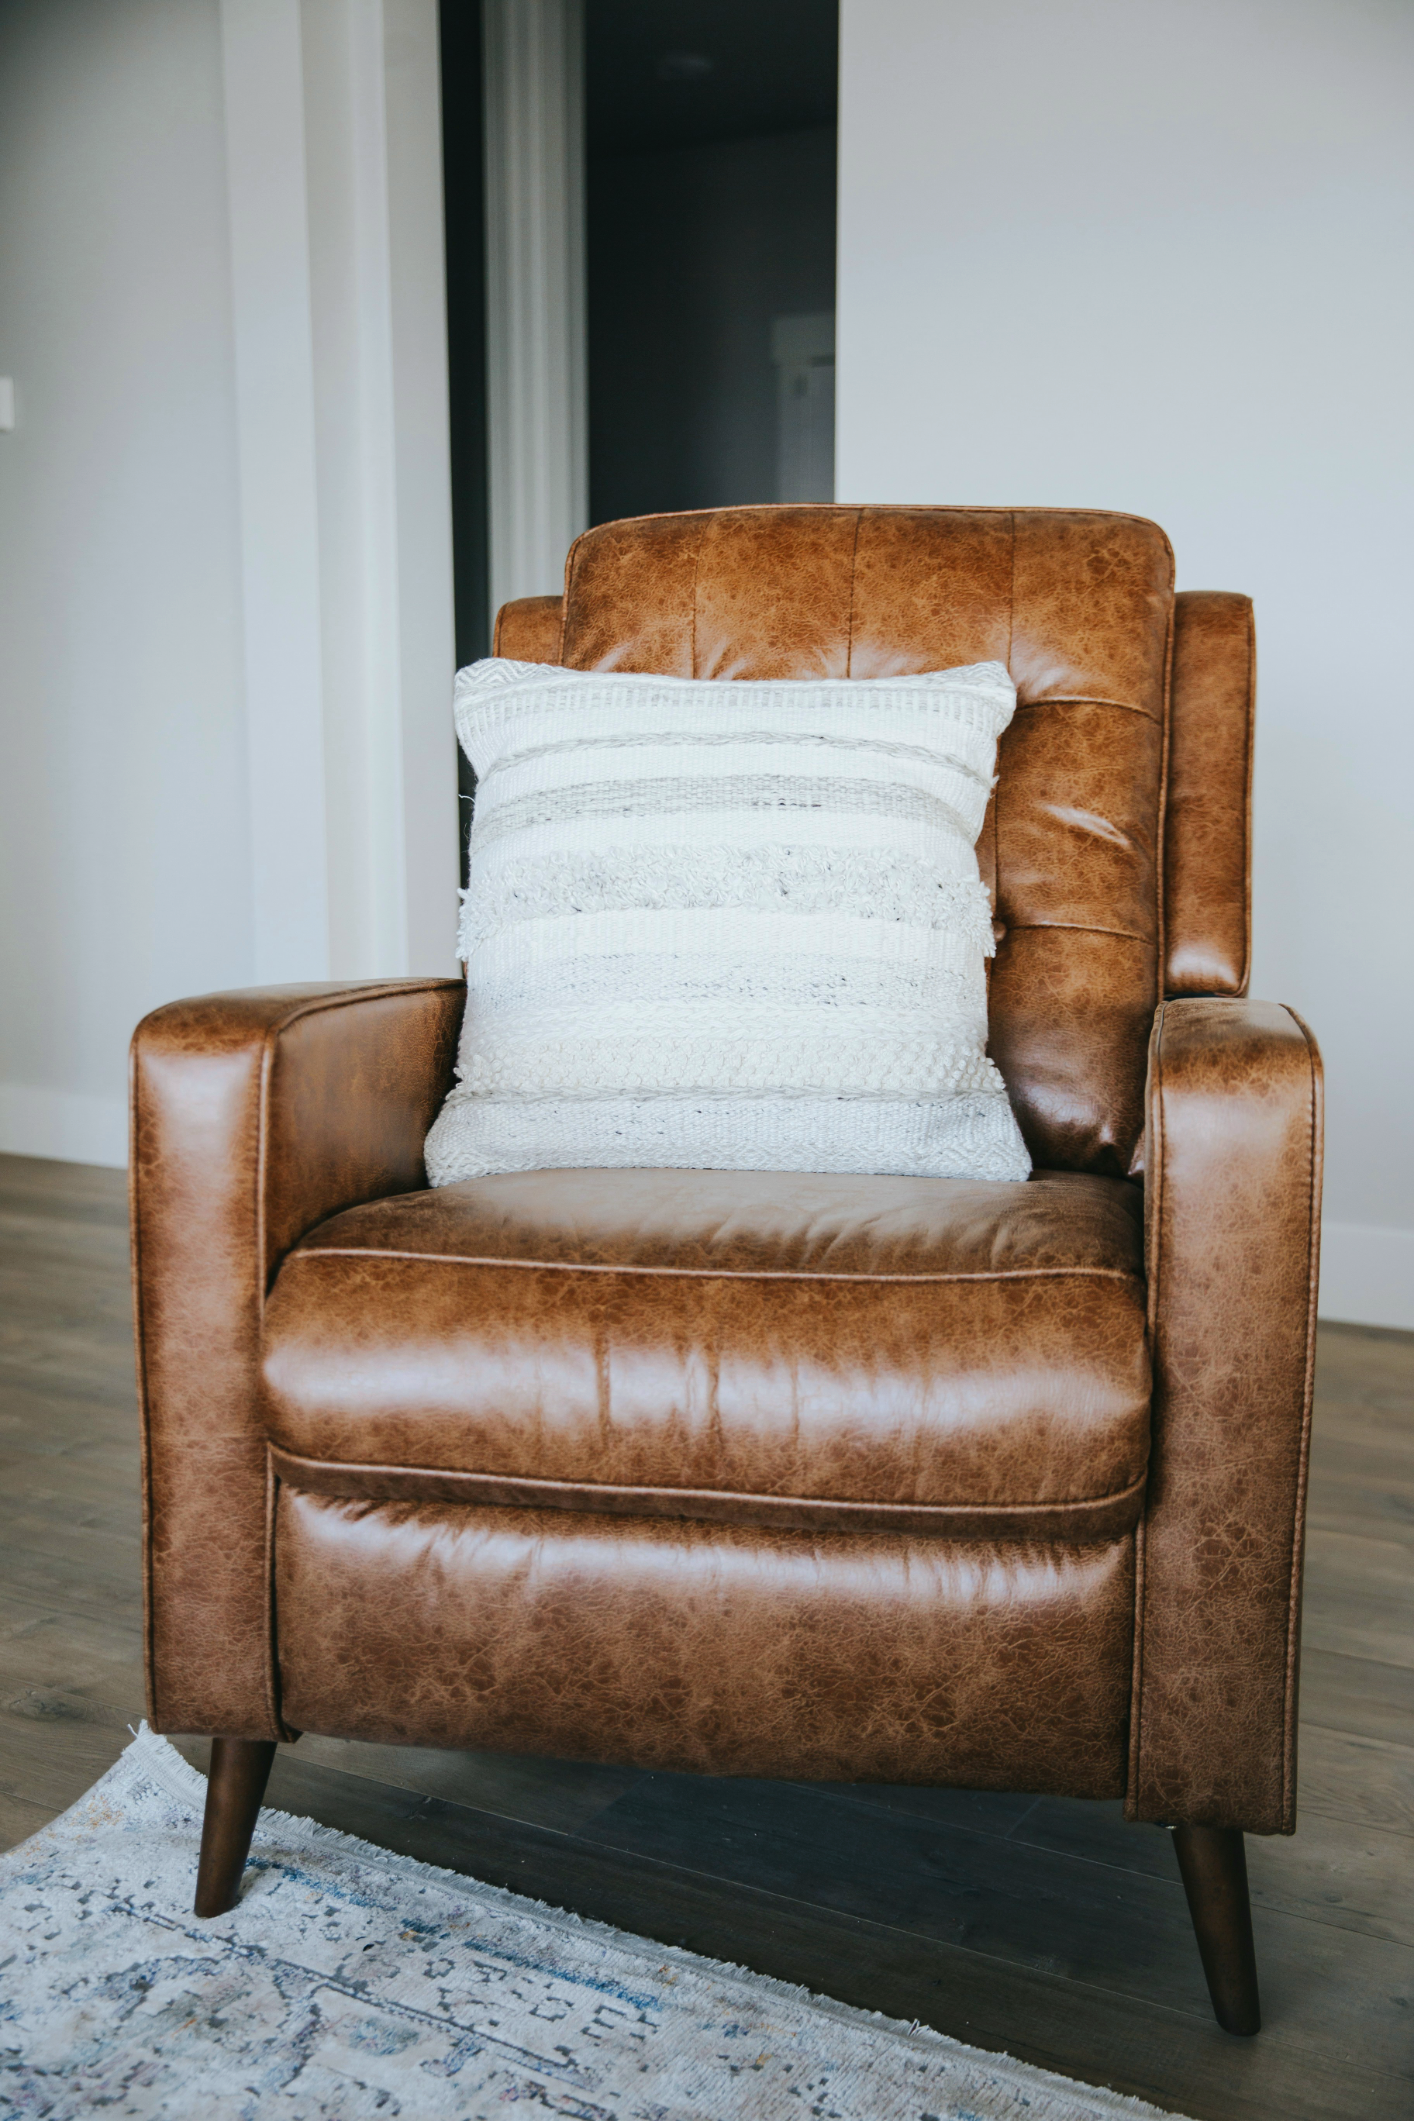 brown leather upright chair in a white room with a white and gray striped pillow sitting on it